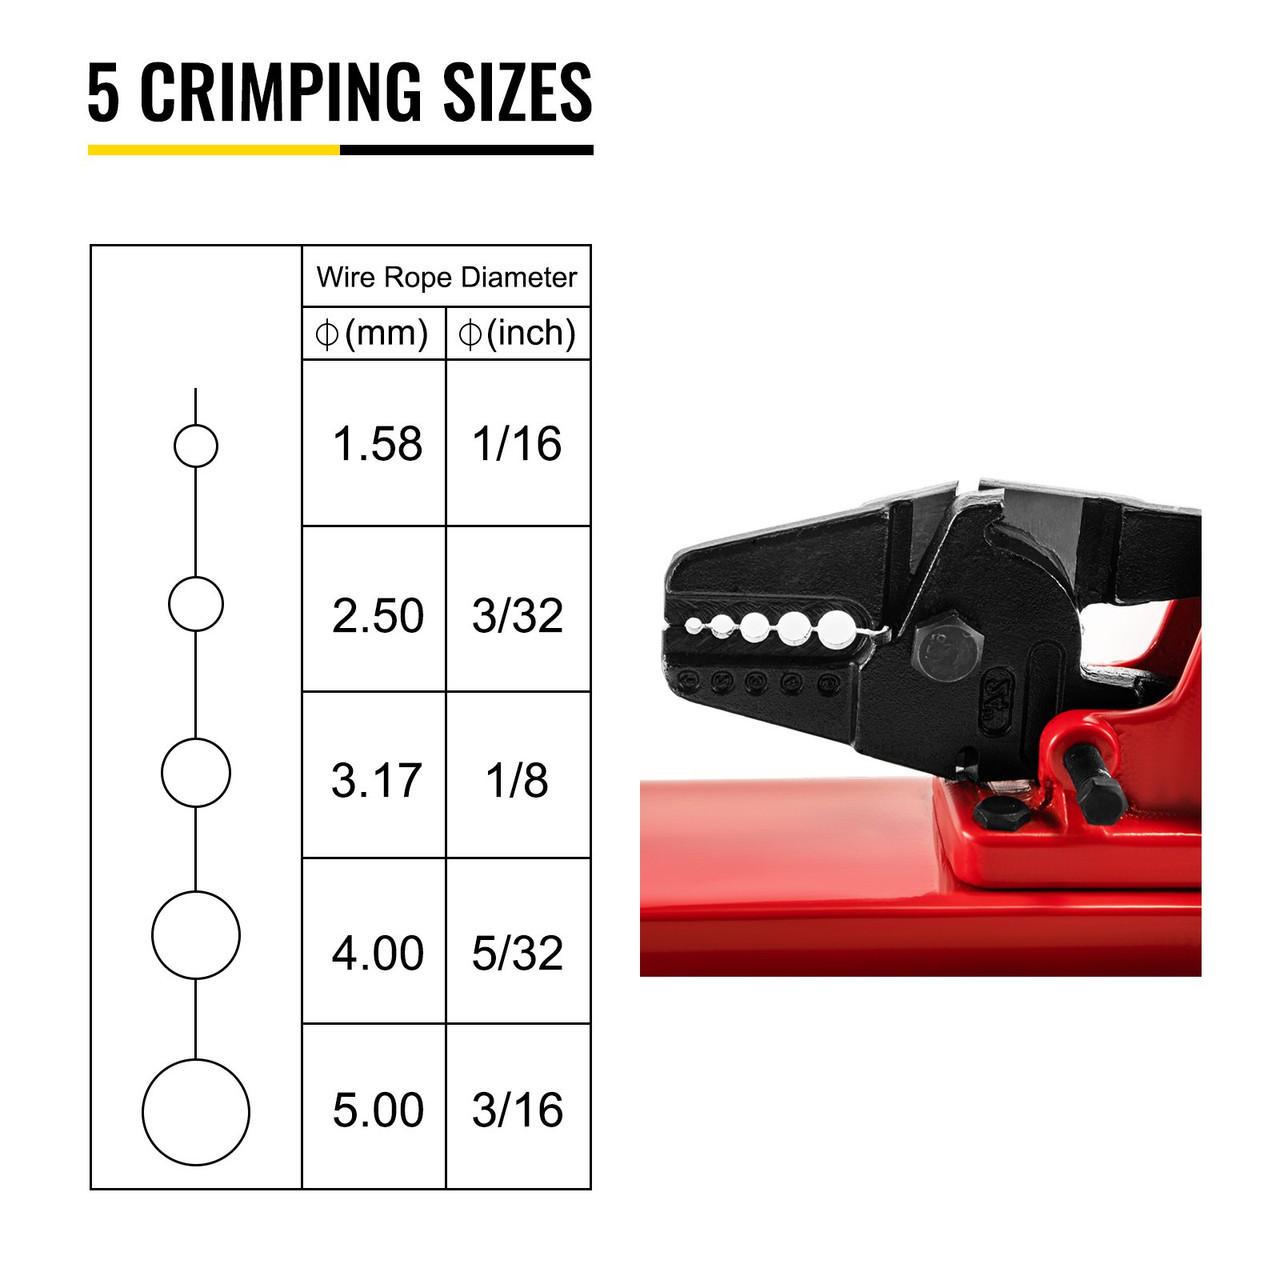 30 Inch Hand Swaging Tool, Wire Rope Crimping Tool for 5/32,1/4,5/16  Wires, Heavy Duty Swager Crimper w/Ergonomic Handle Design, Fishing Tool  for